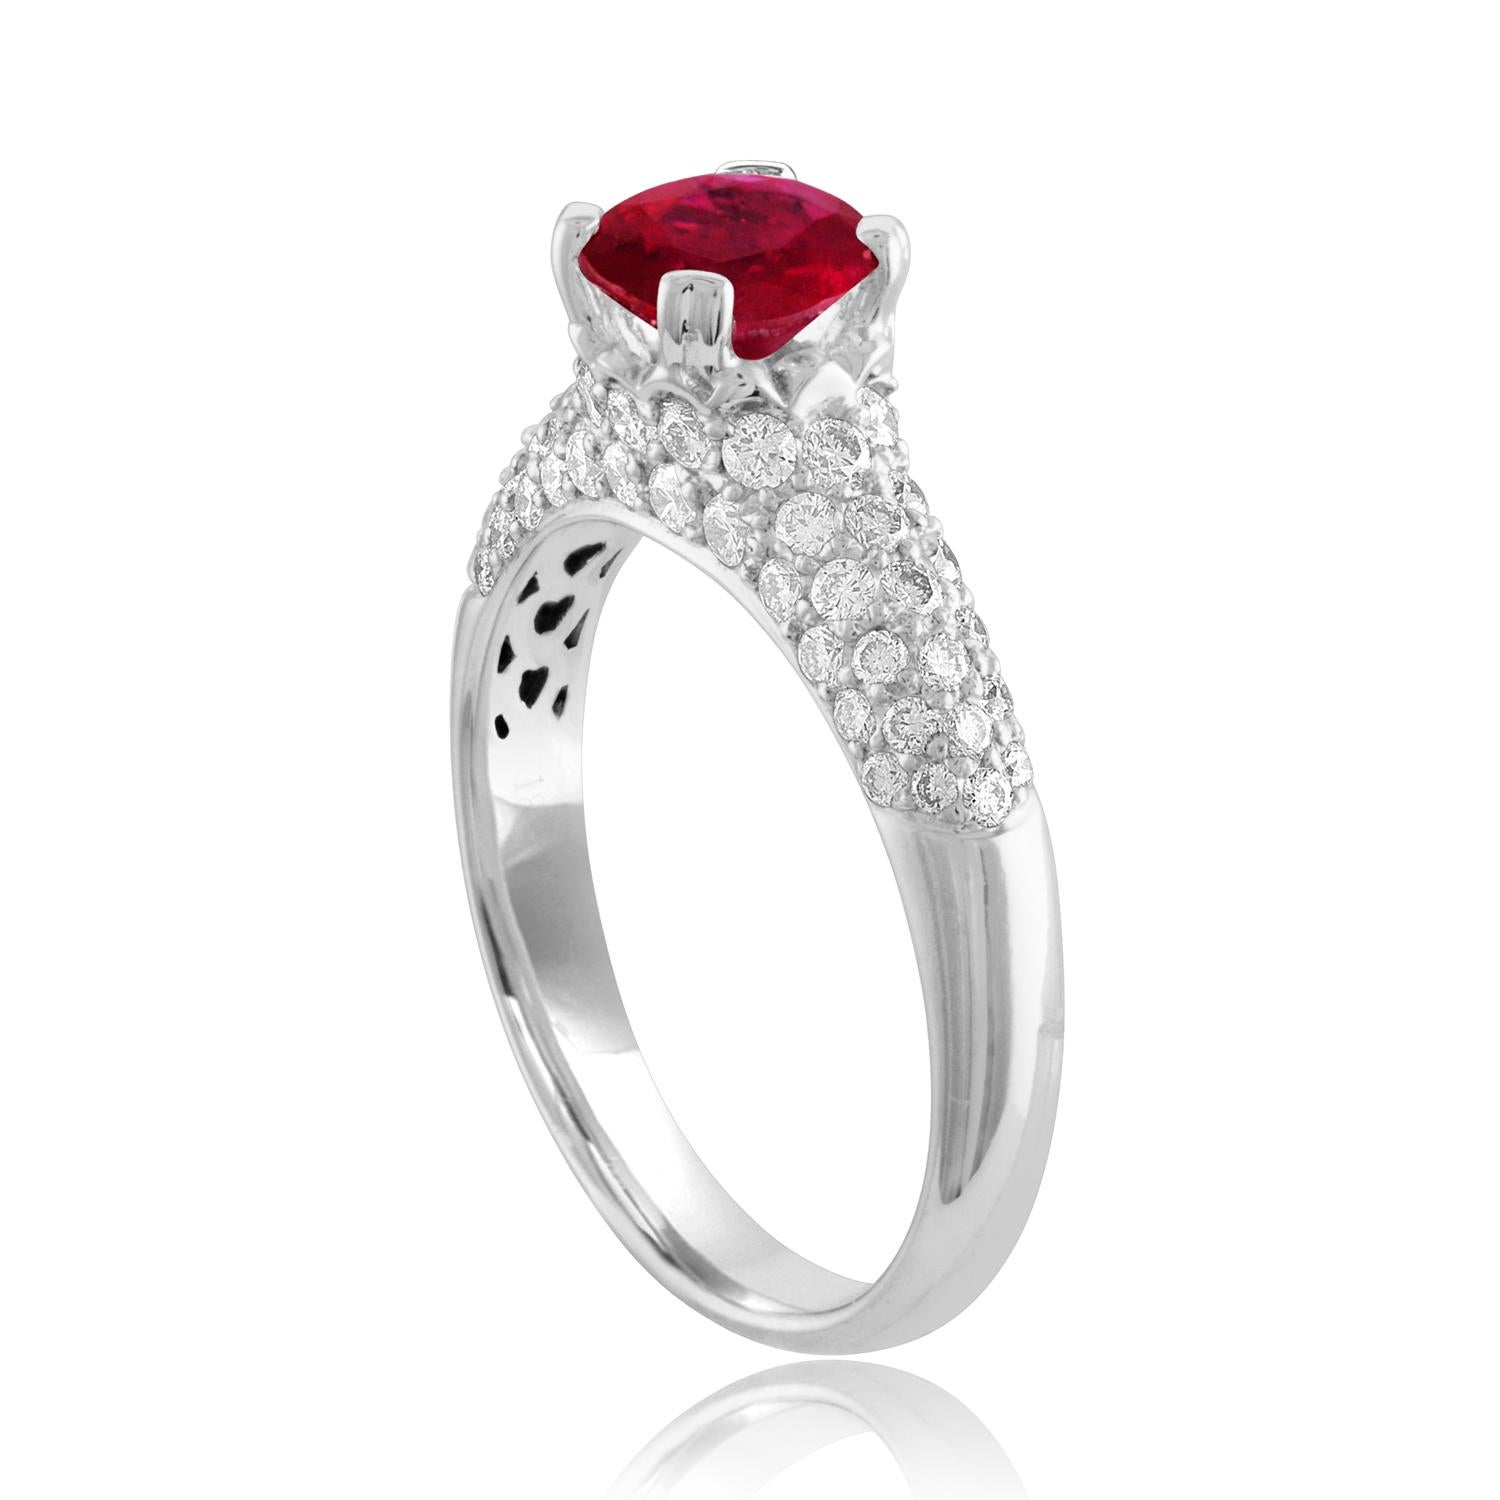 Beautiful Pave Ring
The ring is 18K White Gold
The Center Stone is a Round Ruby 1.14 Carats
The Ruby is AGL Certified Heated
There are 0.77 Carats in Diamonds F/G VS/SI
The ring is a size 6.75, sizable.
The ring weighs 4.2 grams